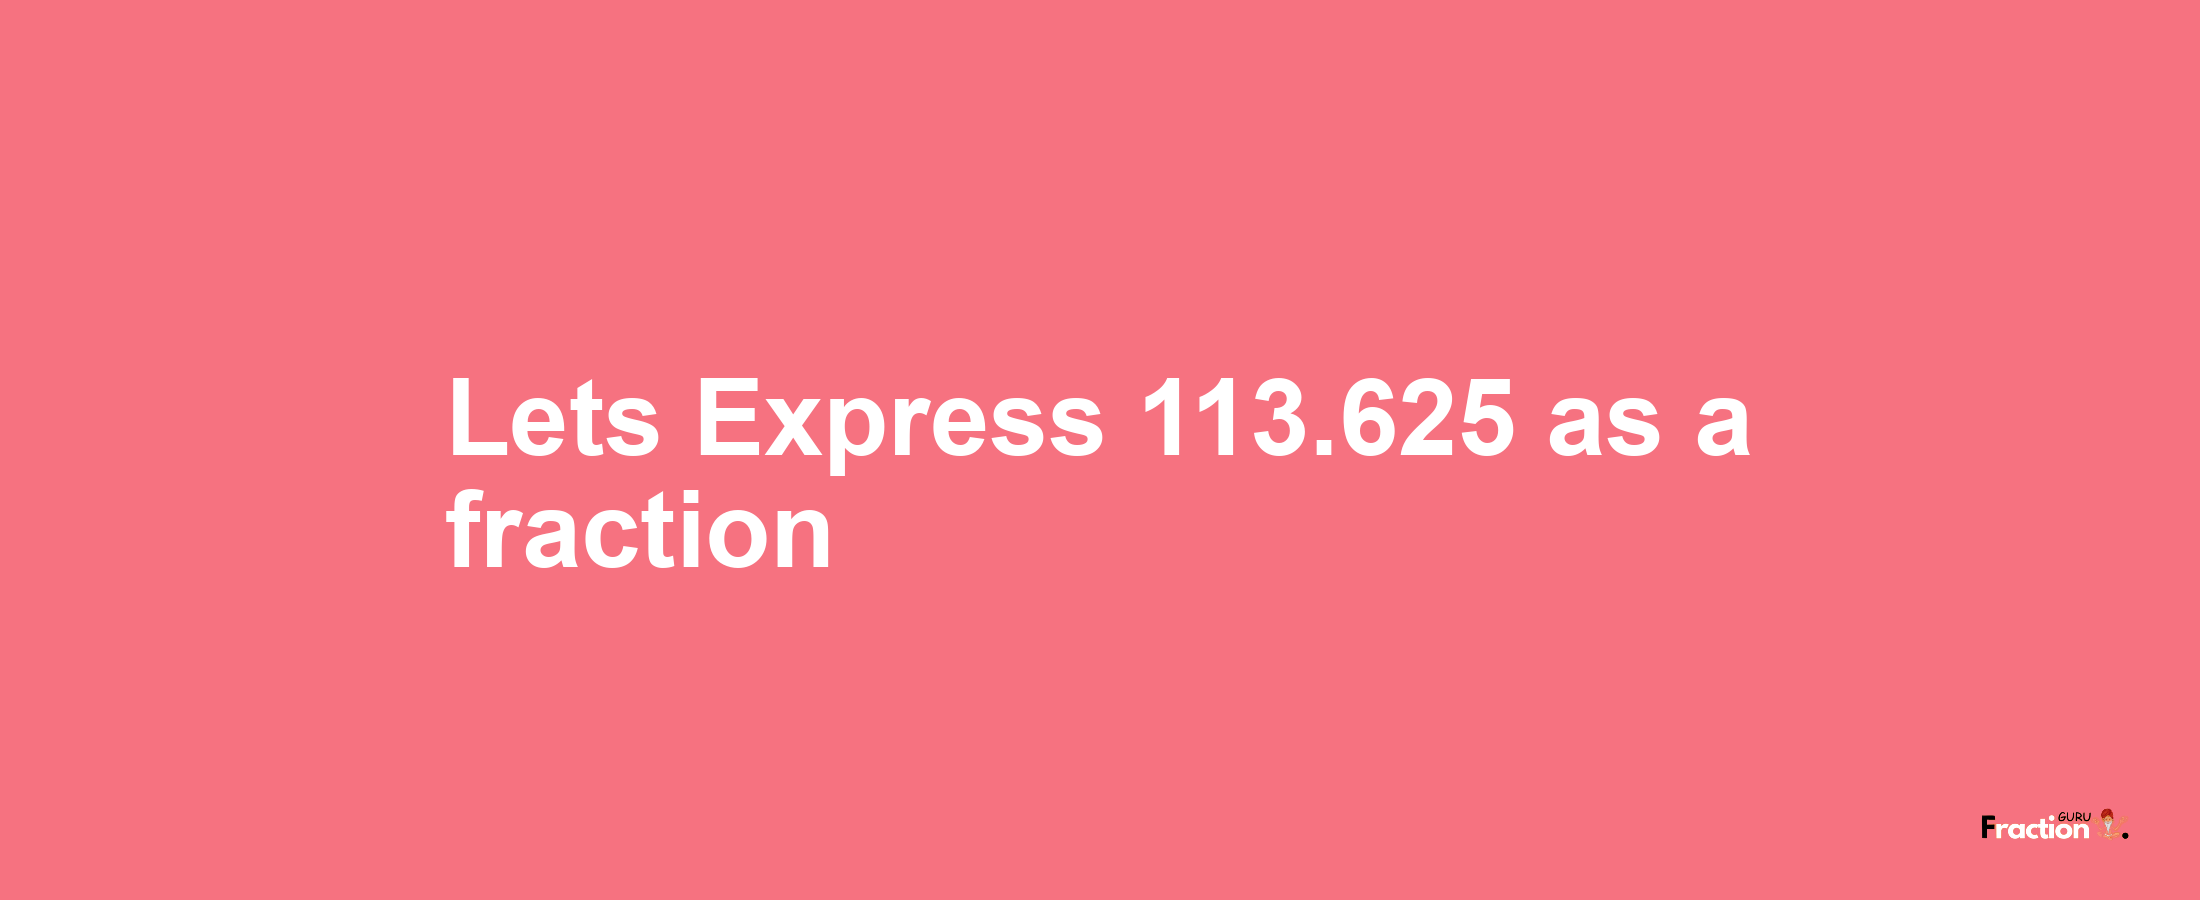 Lets Express 113.625 as afraction